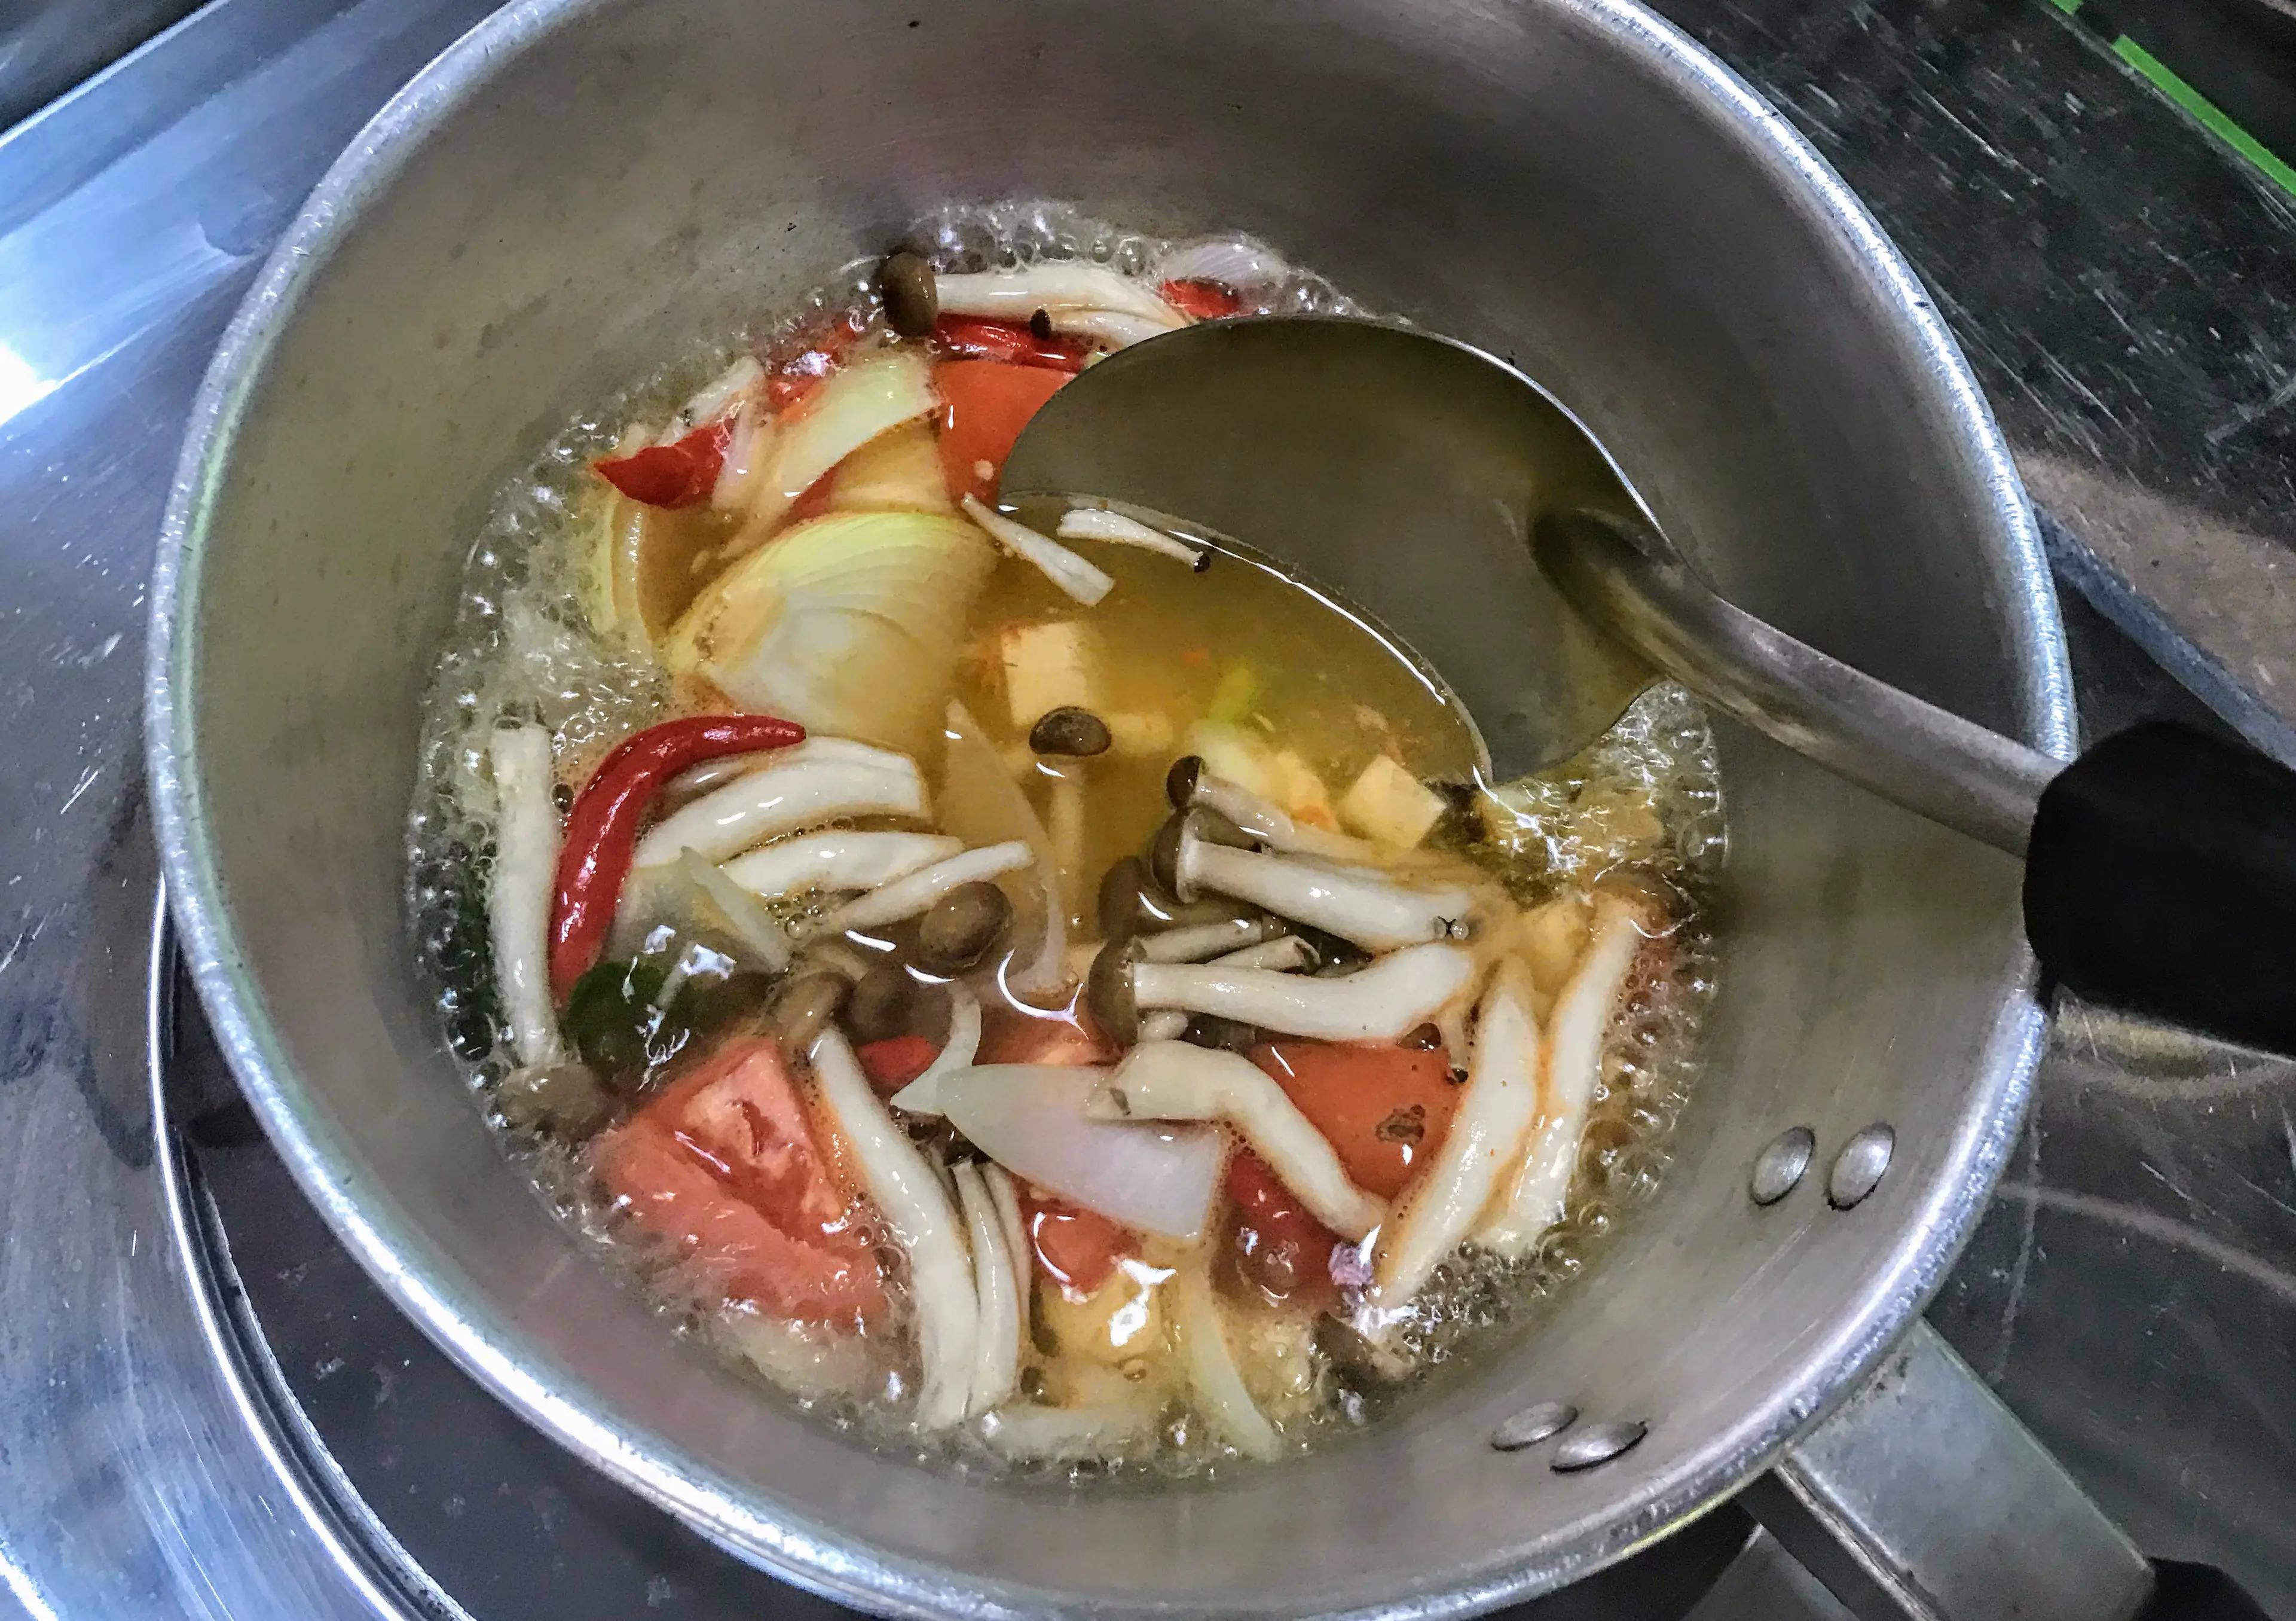 Making hot and sour soup, Koh Chang, Thailand 